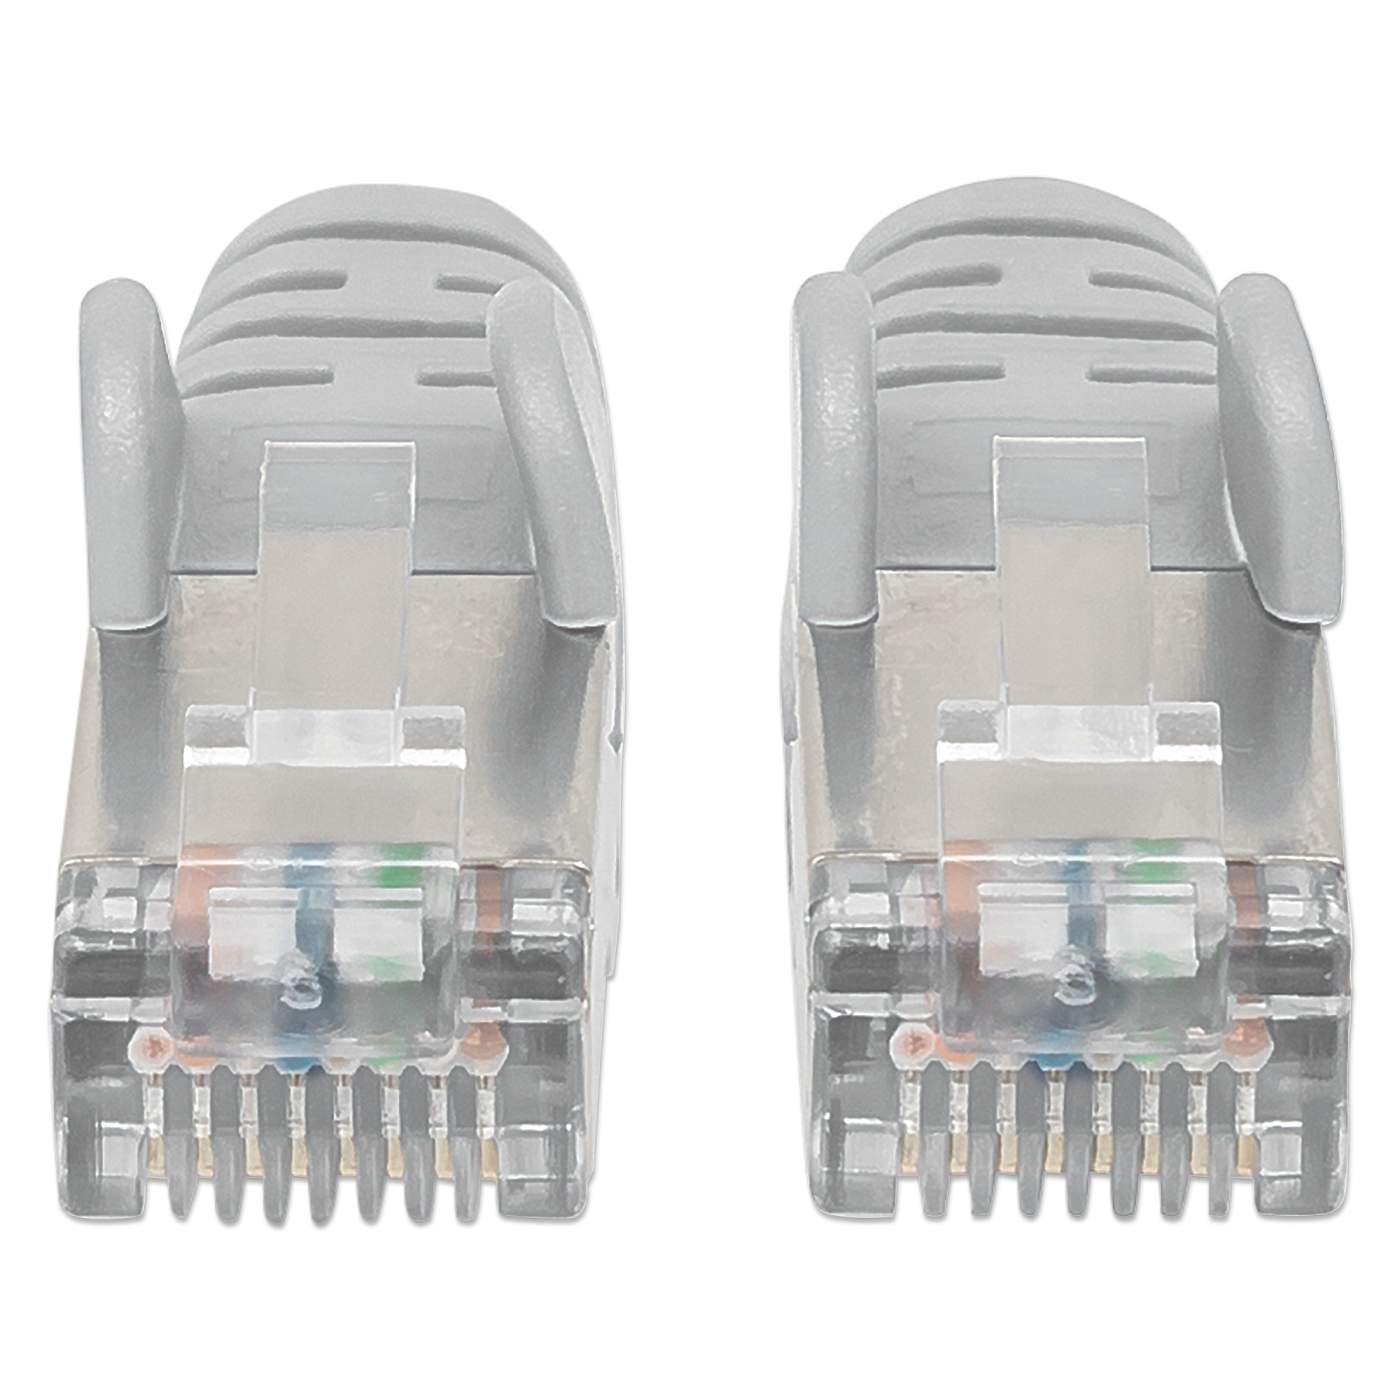 Cat6a S/FTP Network Patch Cable, 1 ft., Gray Image 4